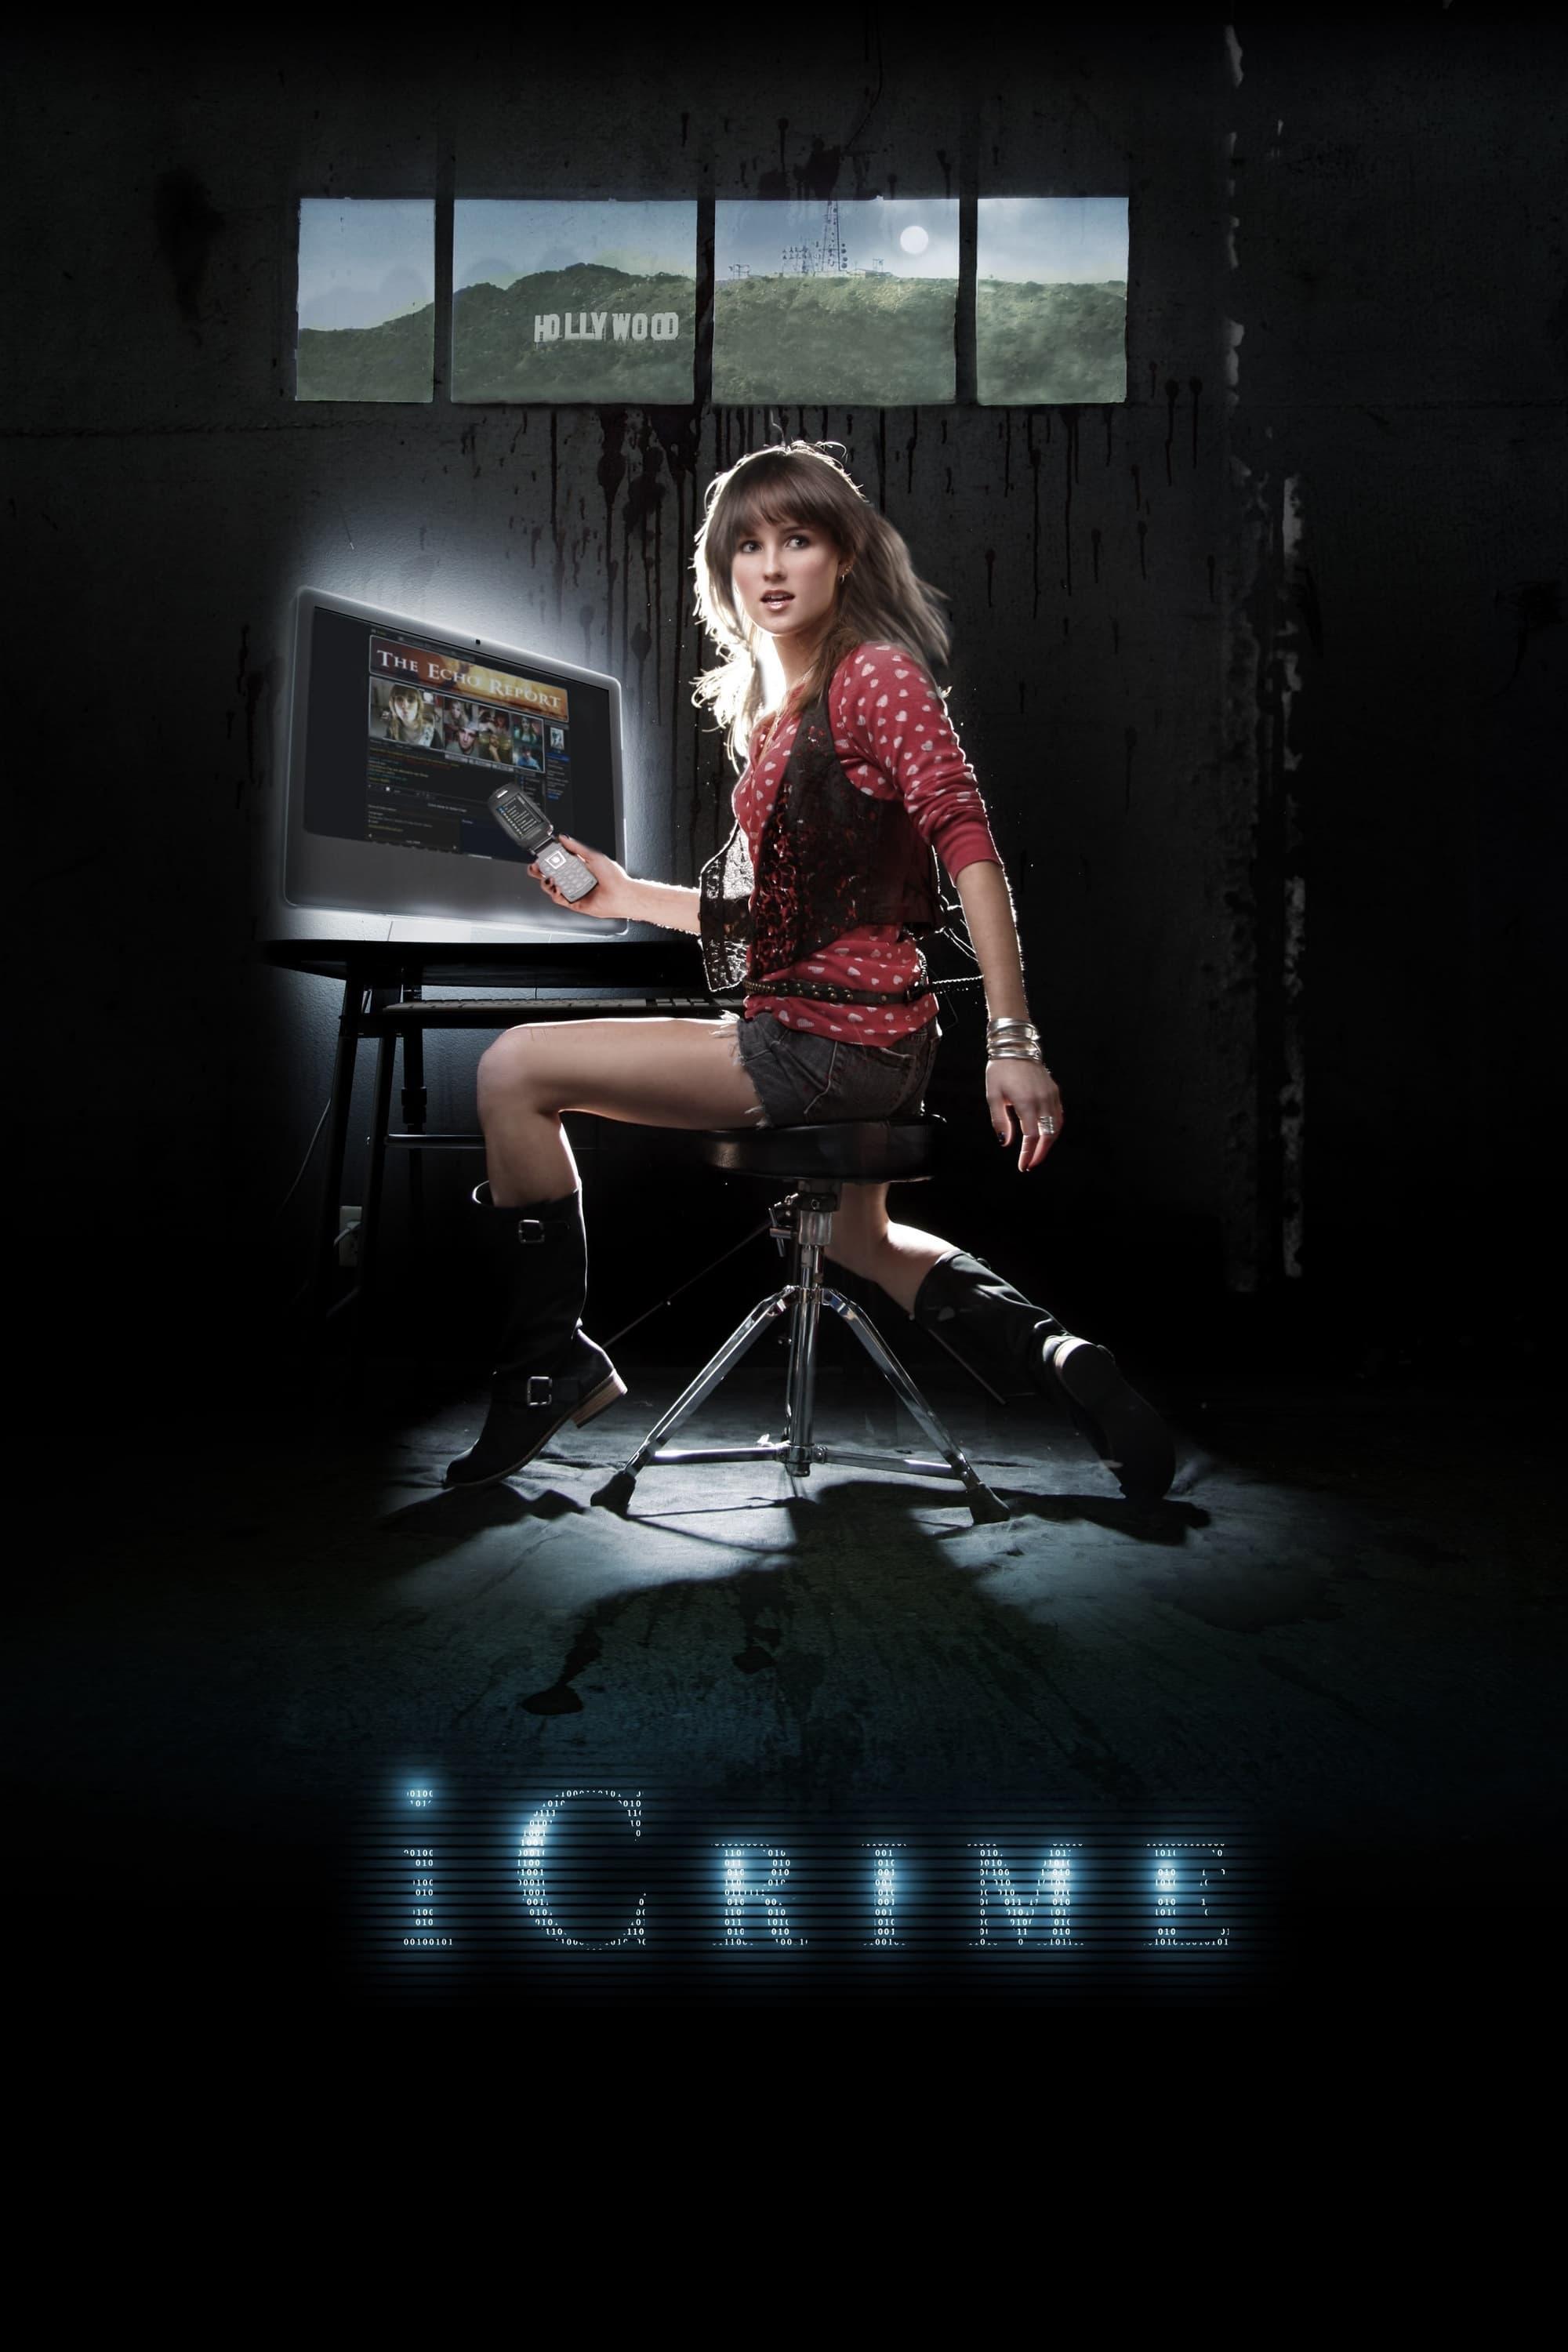 iCrime poster